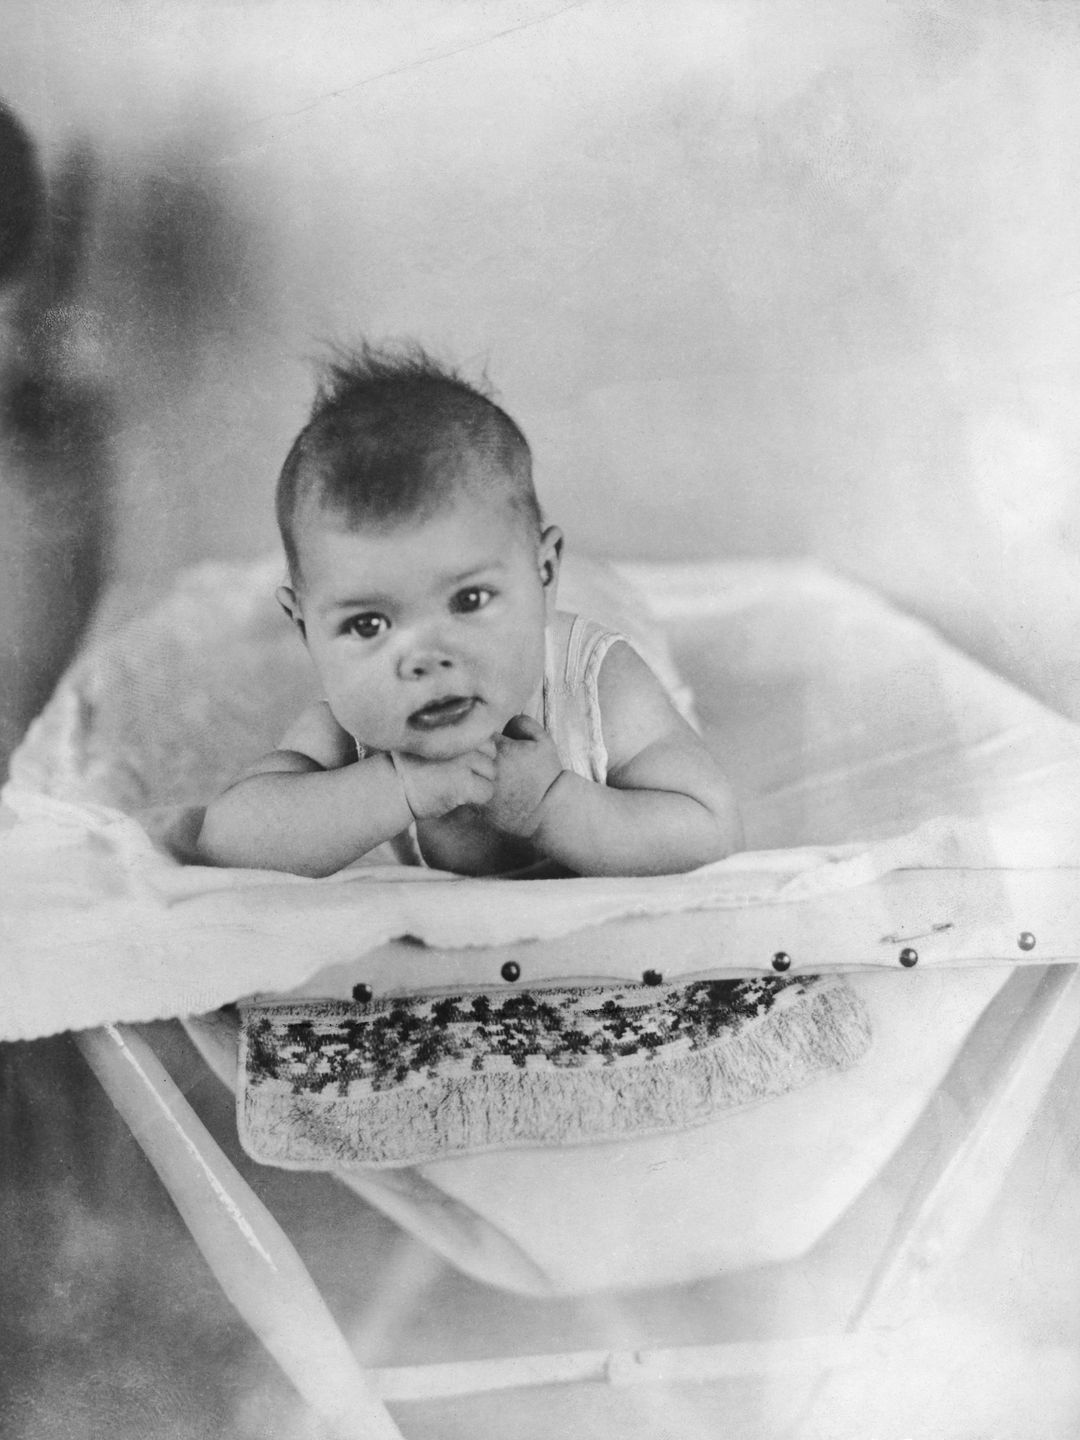 Future American actress and Princess of Monaco, Grace Kelly aged eight months